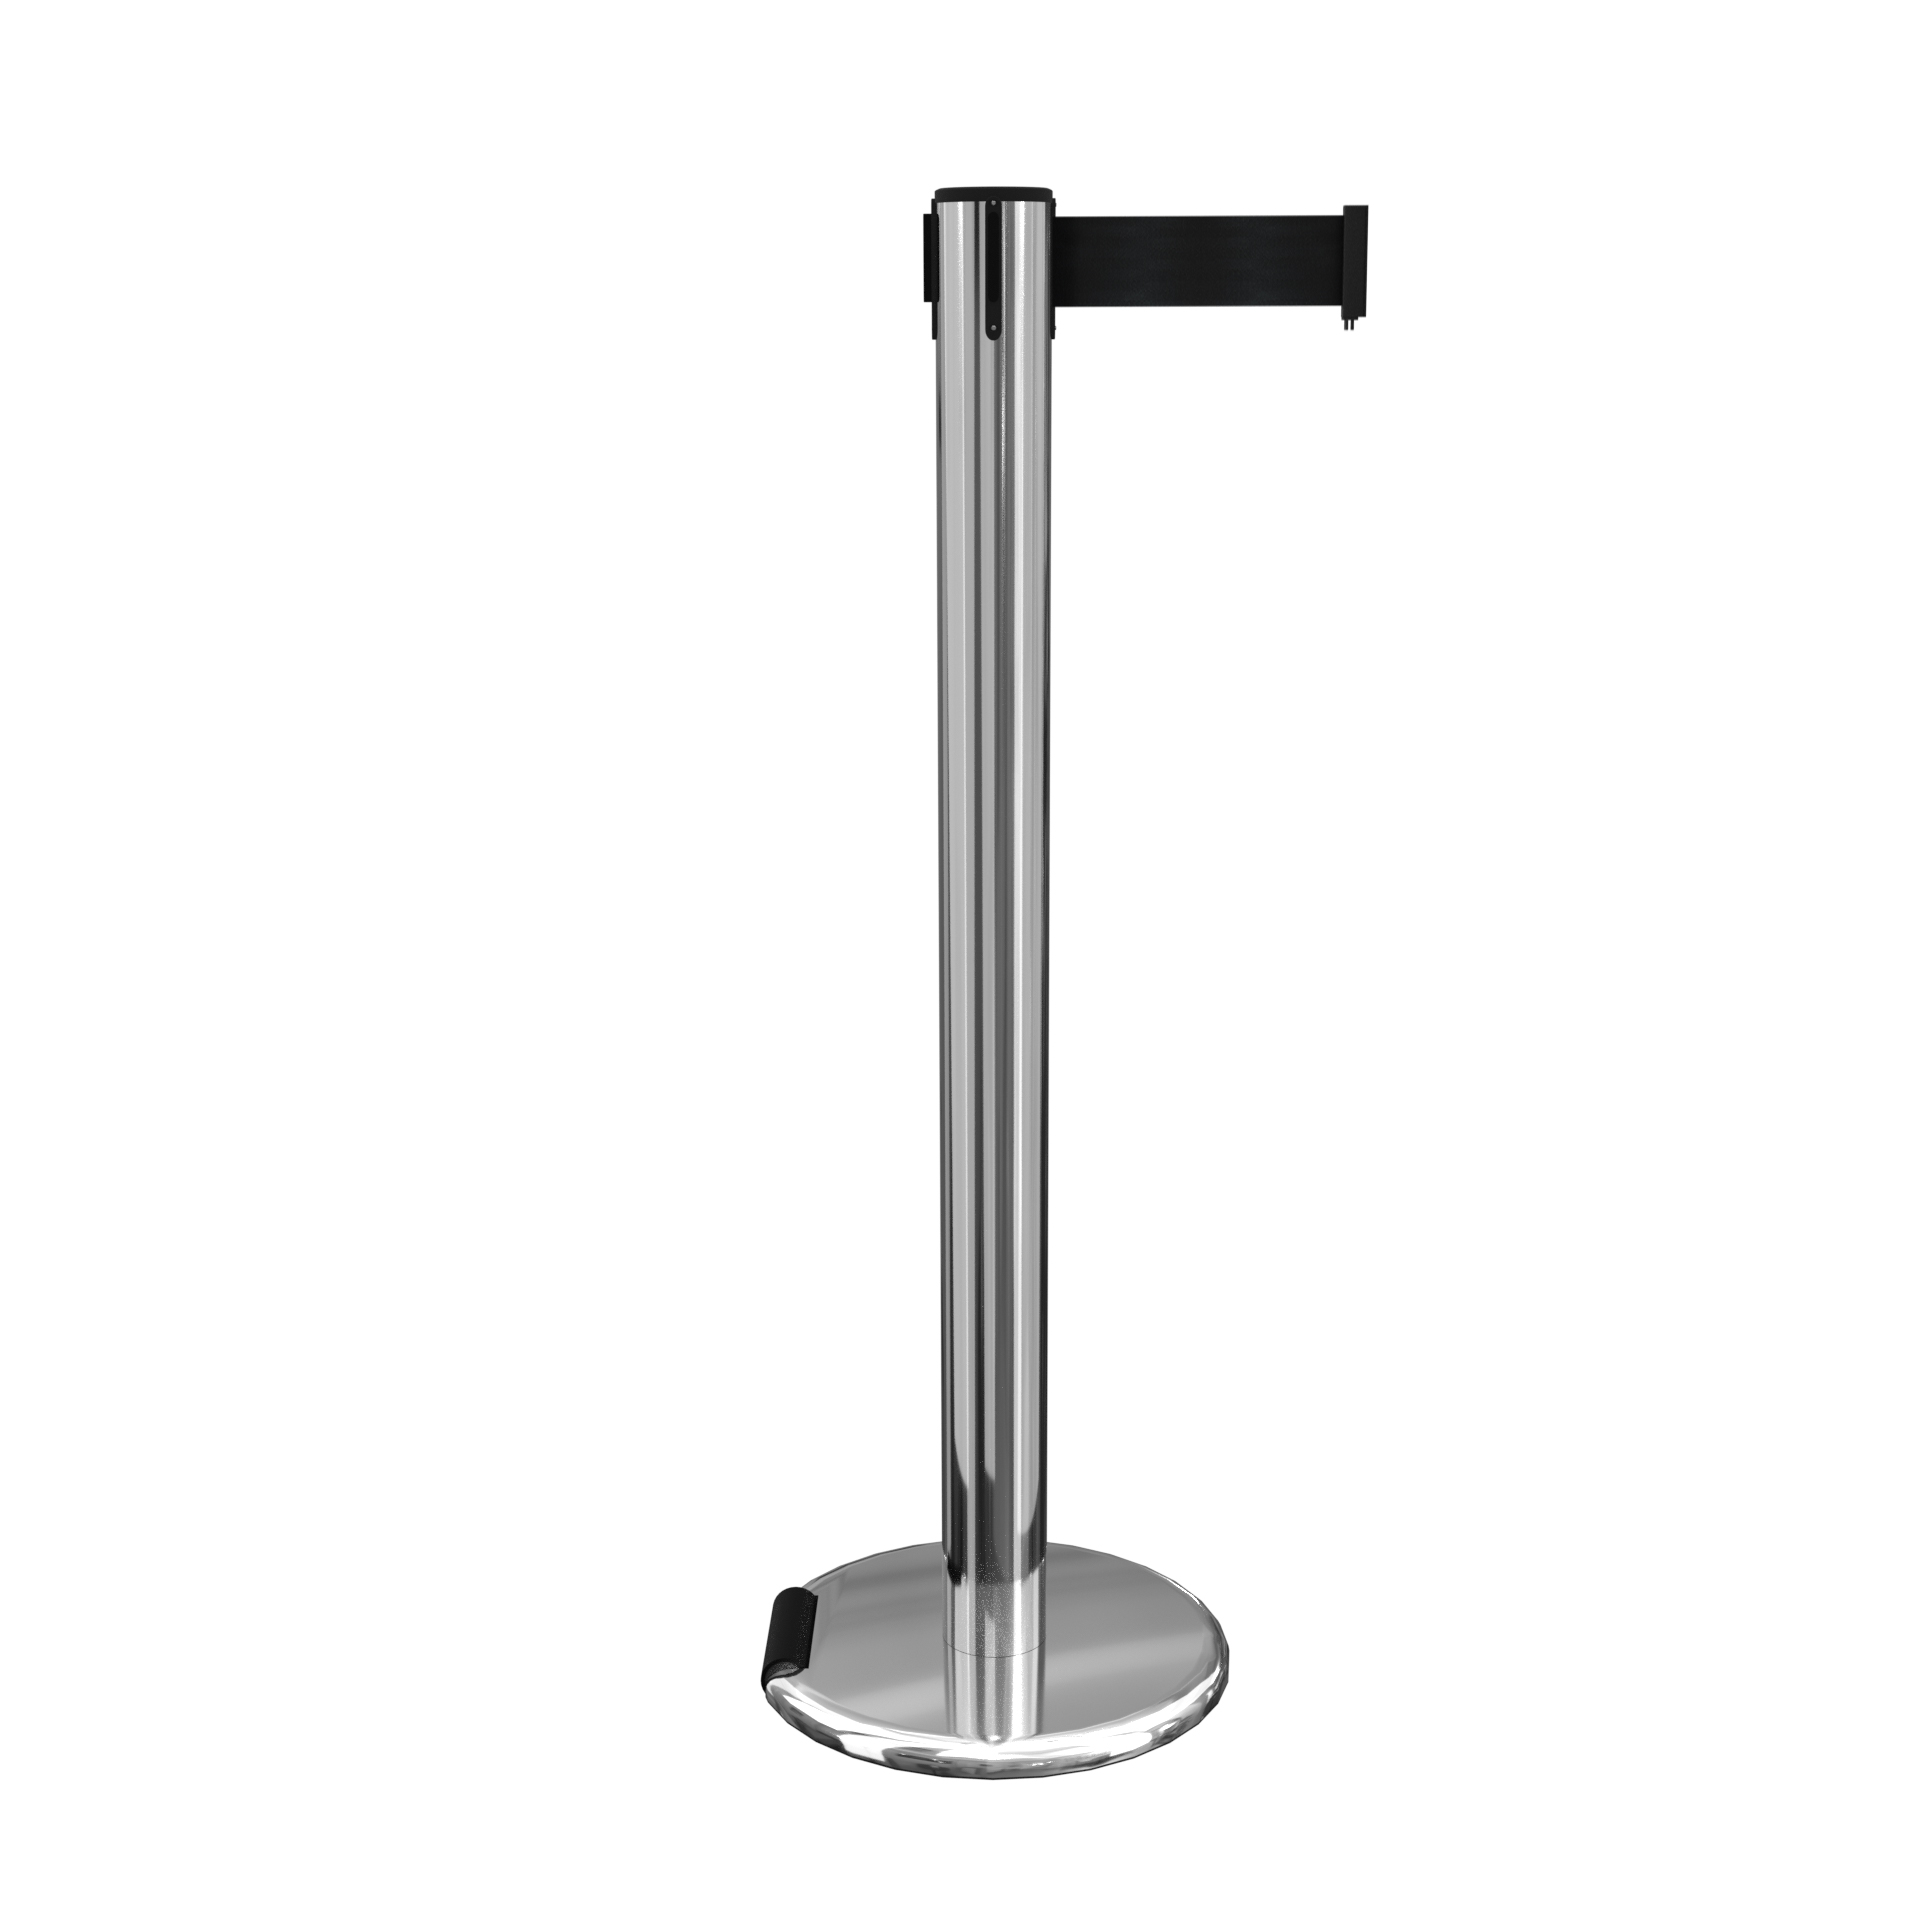 Portable Roller Pro 300 Stanchion Model with Polished Stainless Finish